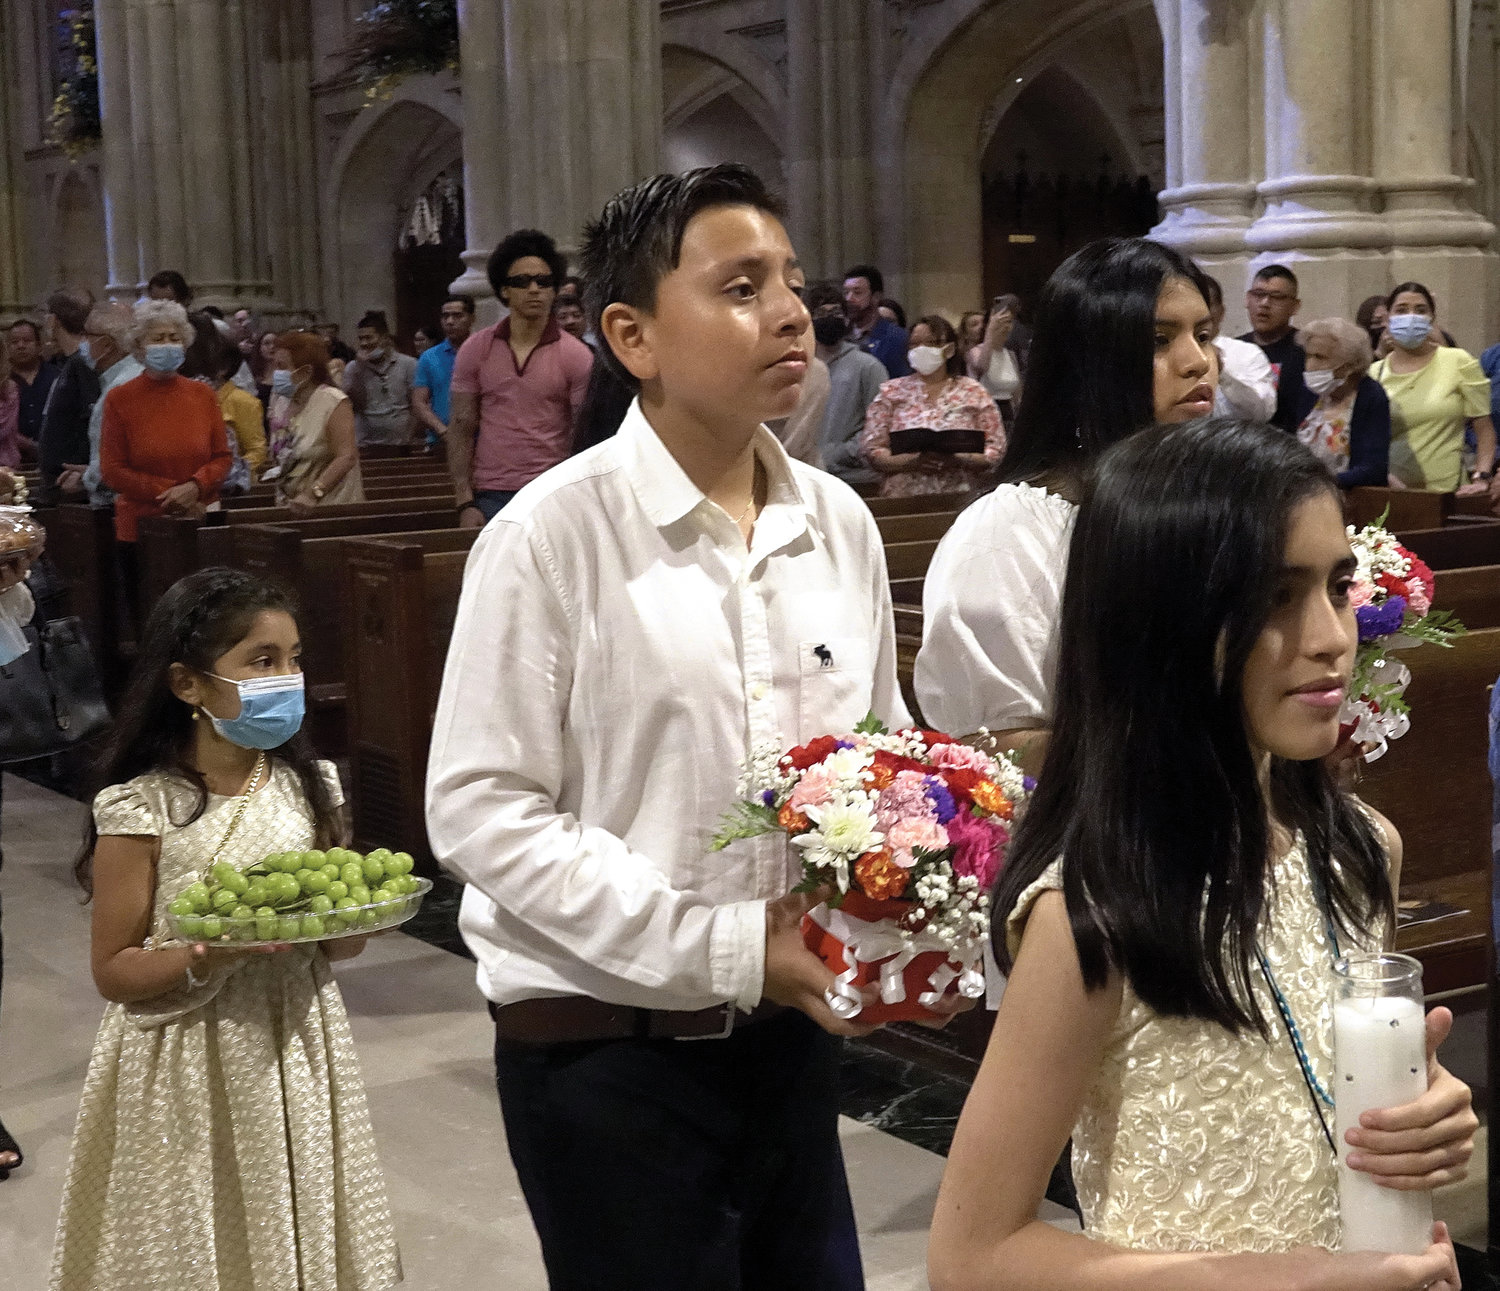 Youths take part in the entrance procession. Father Ato is communications director of the archdiocesan Office of Hispanic Ministry, and pastor of Sacred Heart parish in Manhattan.